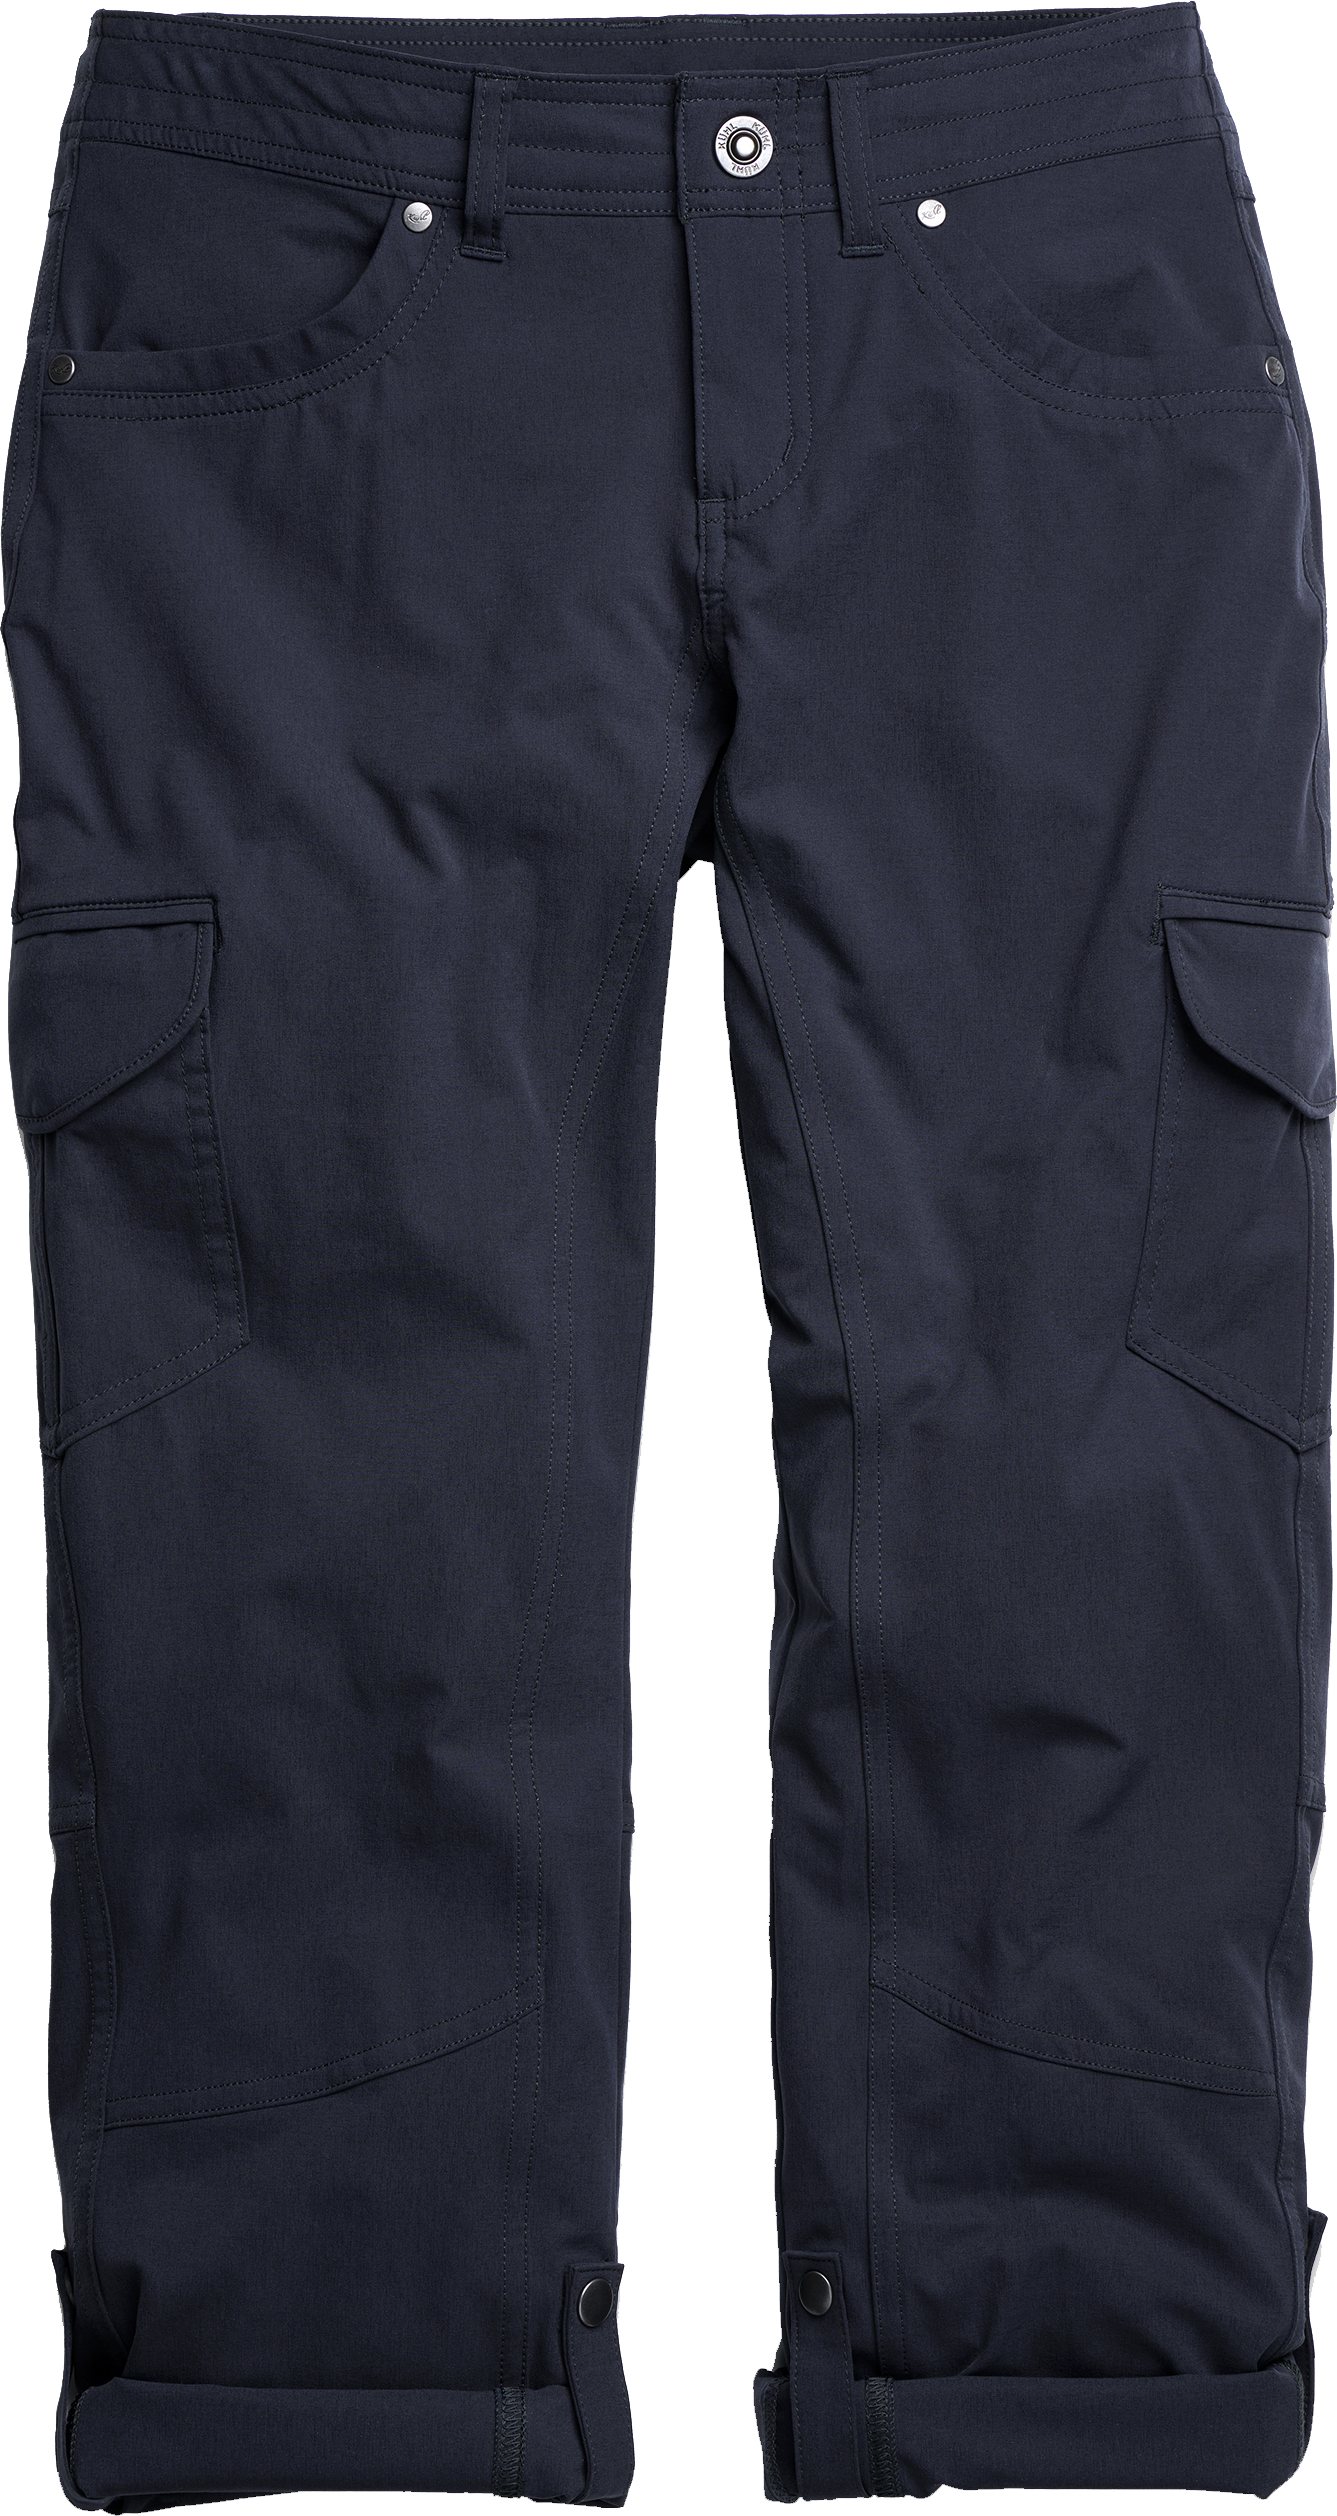 Women's Freeflex Roll-Up Pant - Great Outdoor Provision Company